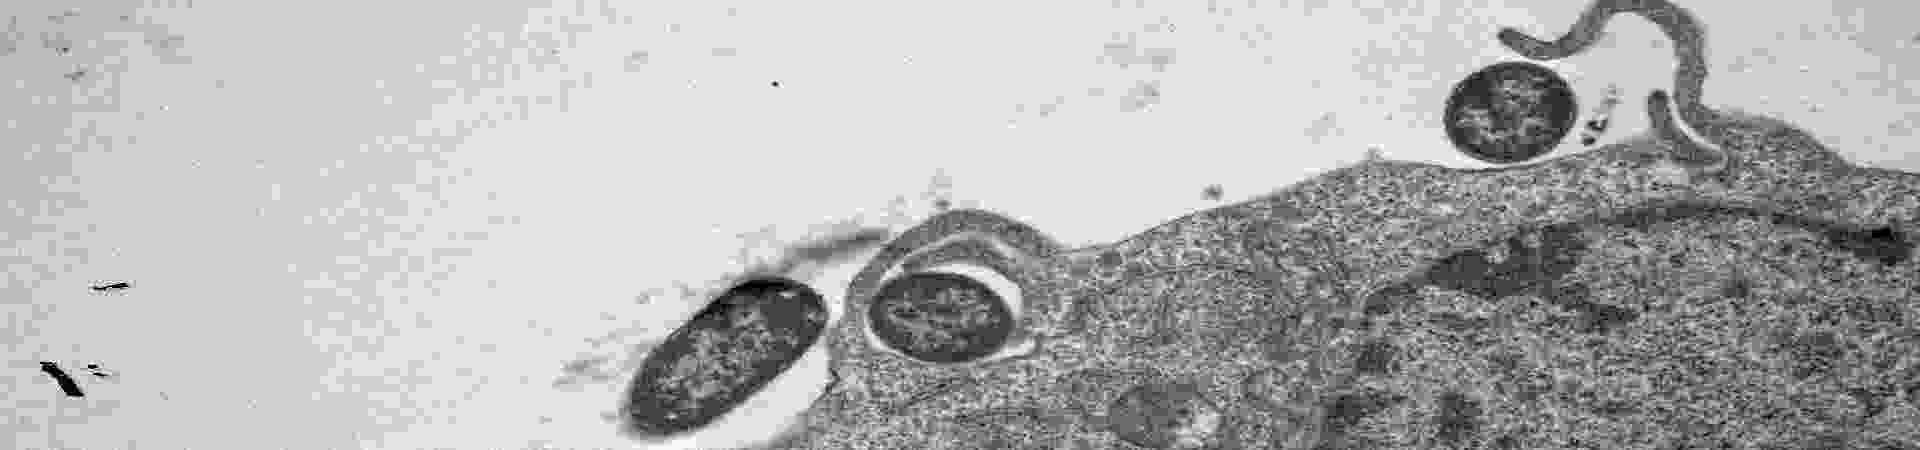 macrophage-eating-Y-pestis-(kate-fitzgerald's-conflicted-copy-2016-08-16).png